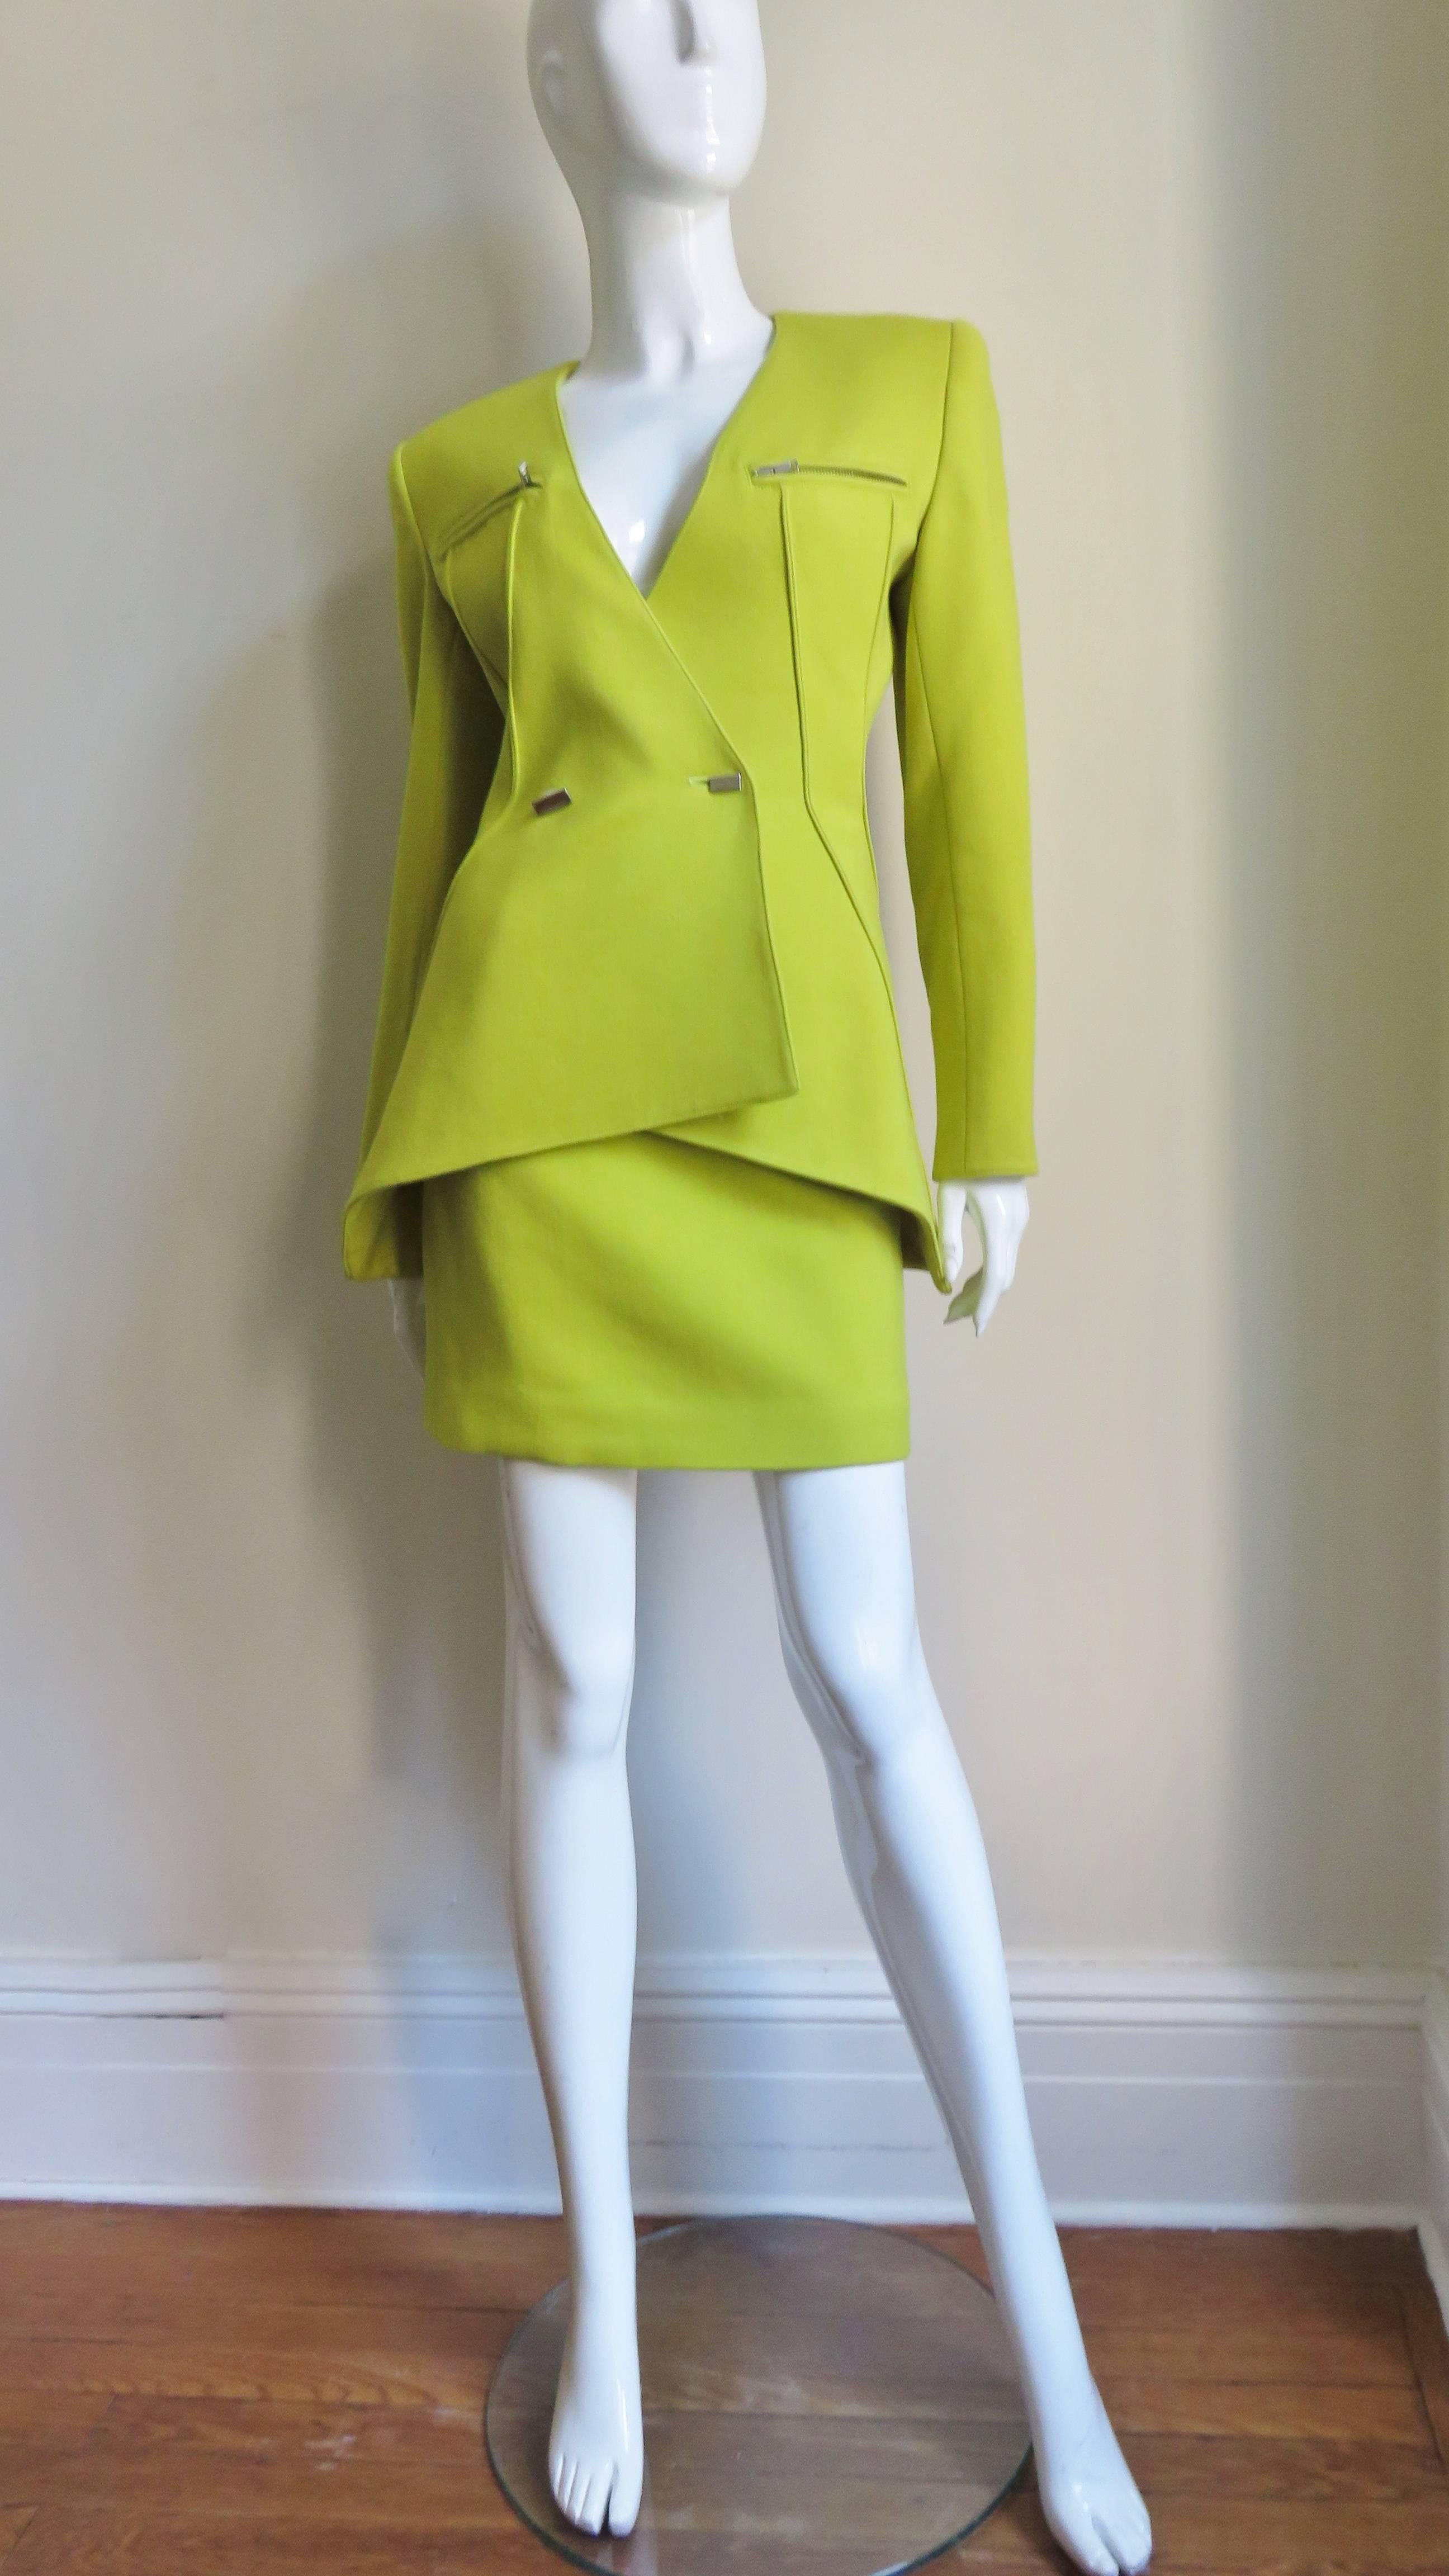  Claude Montana New Neon Futuristic Skirt Suit A/W 1991 In New Condition For Sale In Water Mill, NY